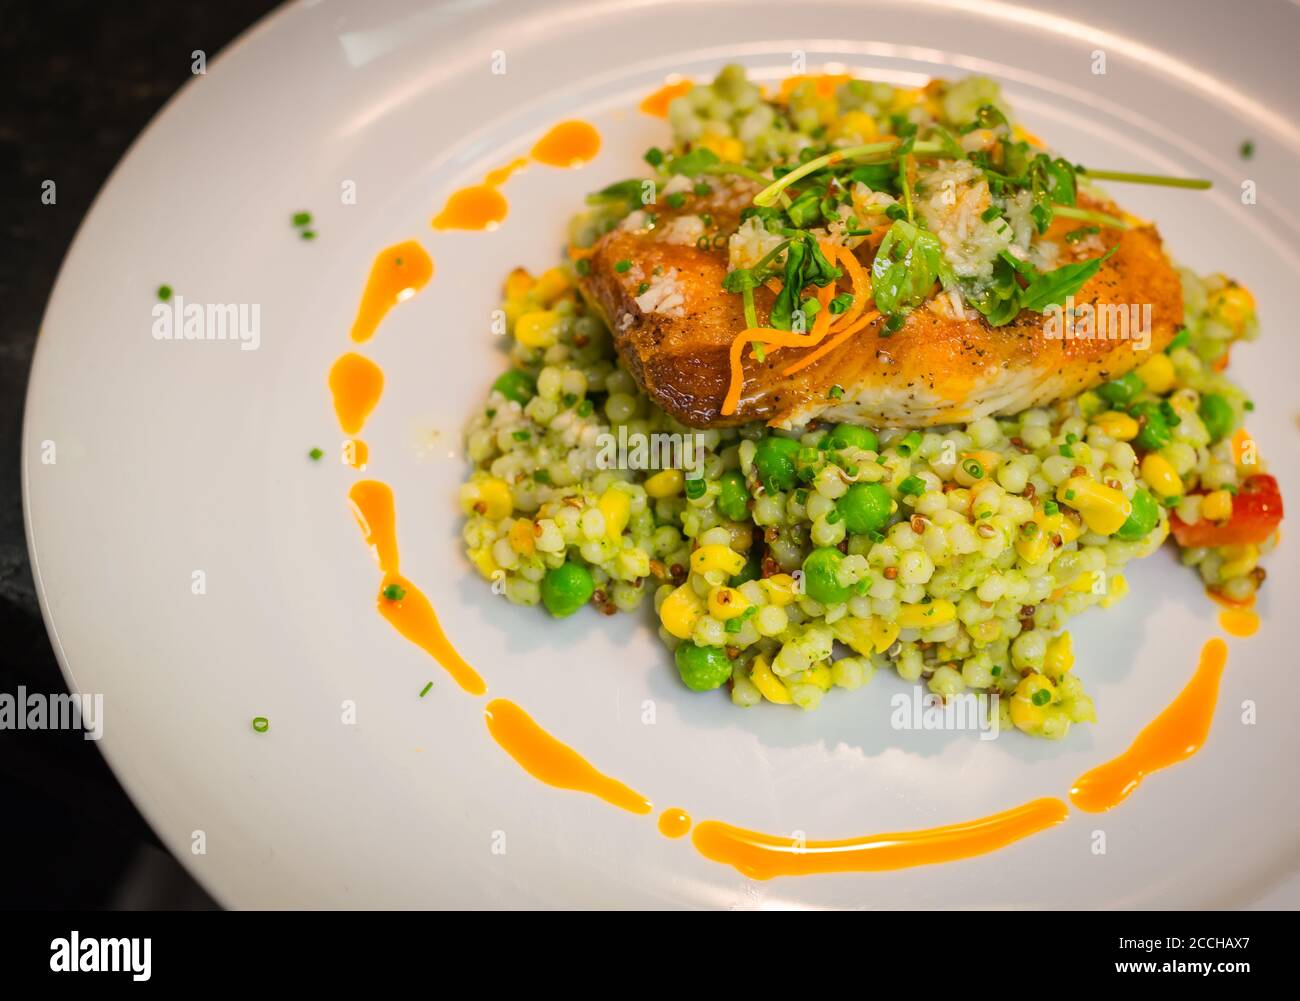 An entree of fresh fish and vegetables with sophisticated plating in a fine dining restaurant Stock Photo